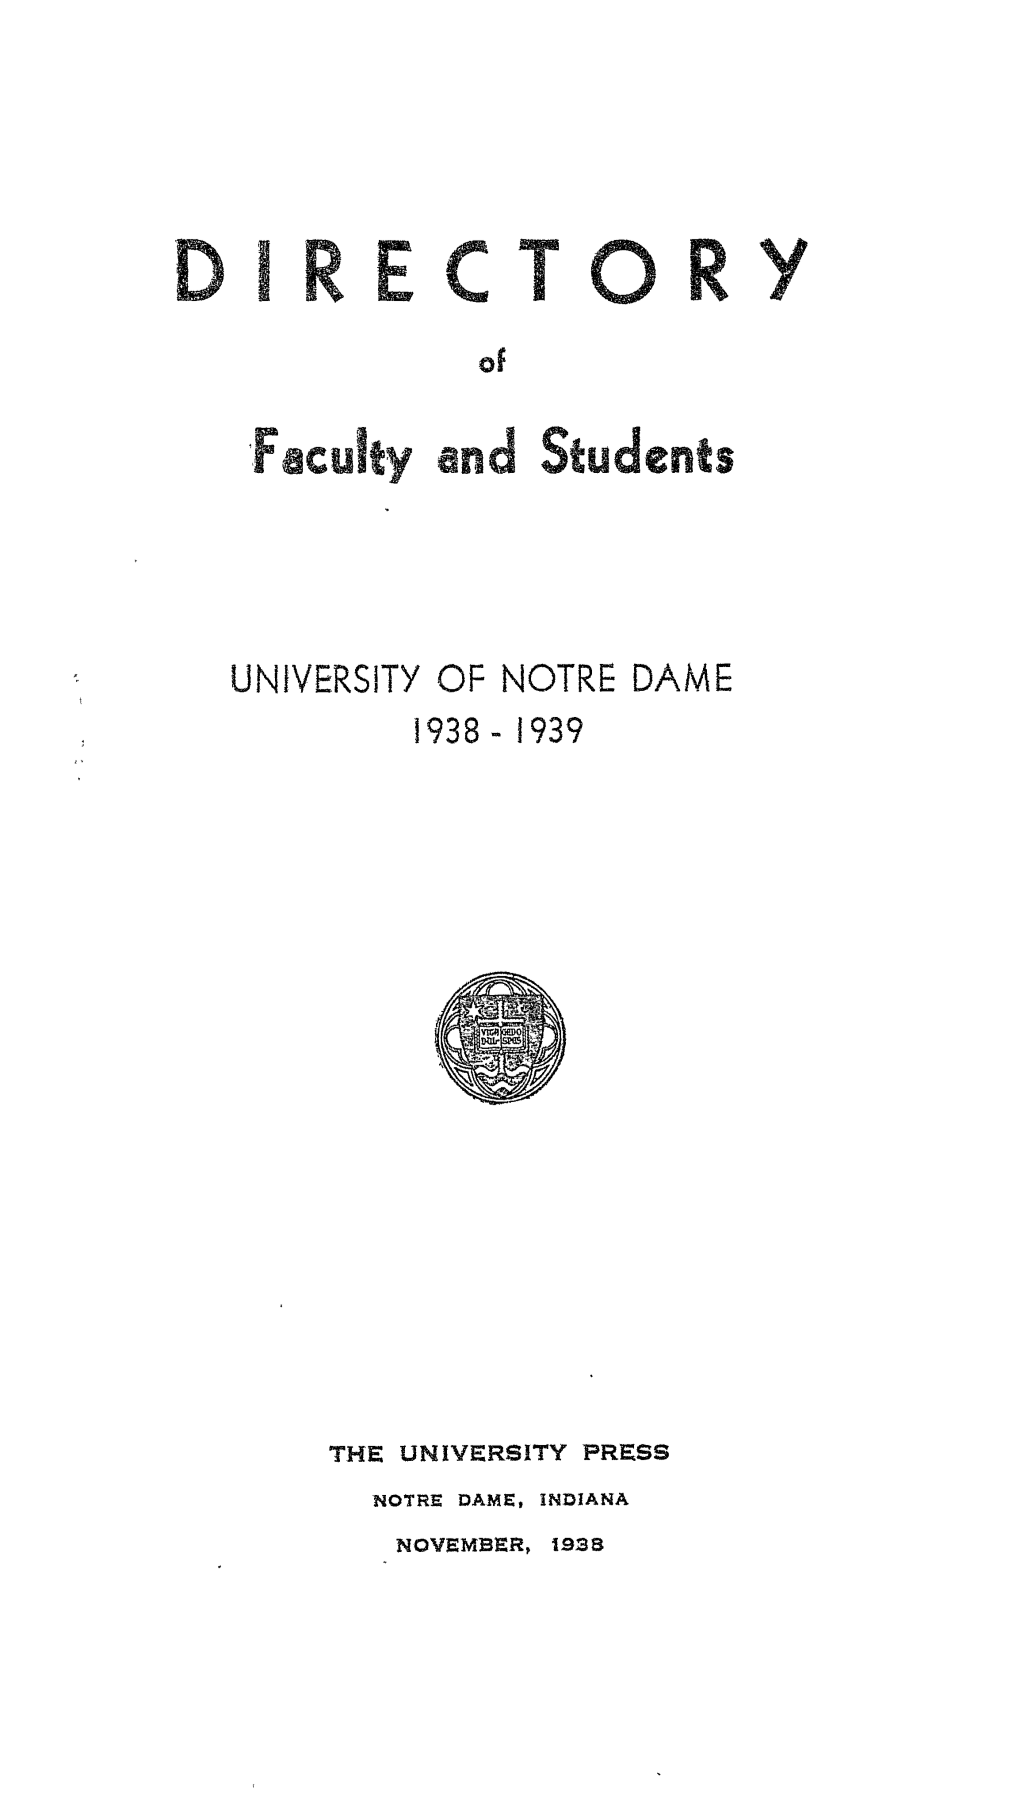 Notre Dame Directory, 1938